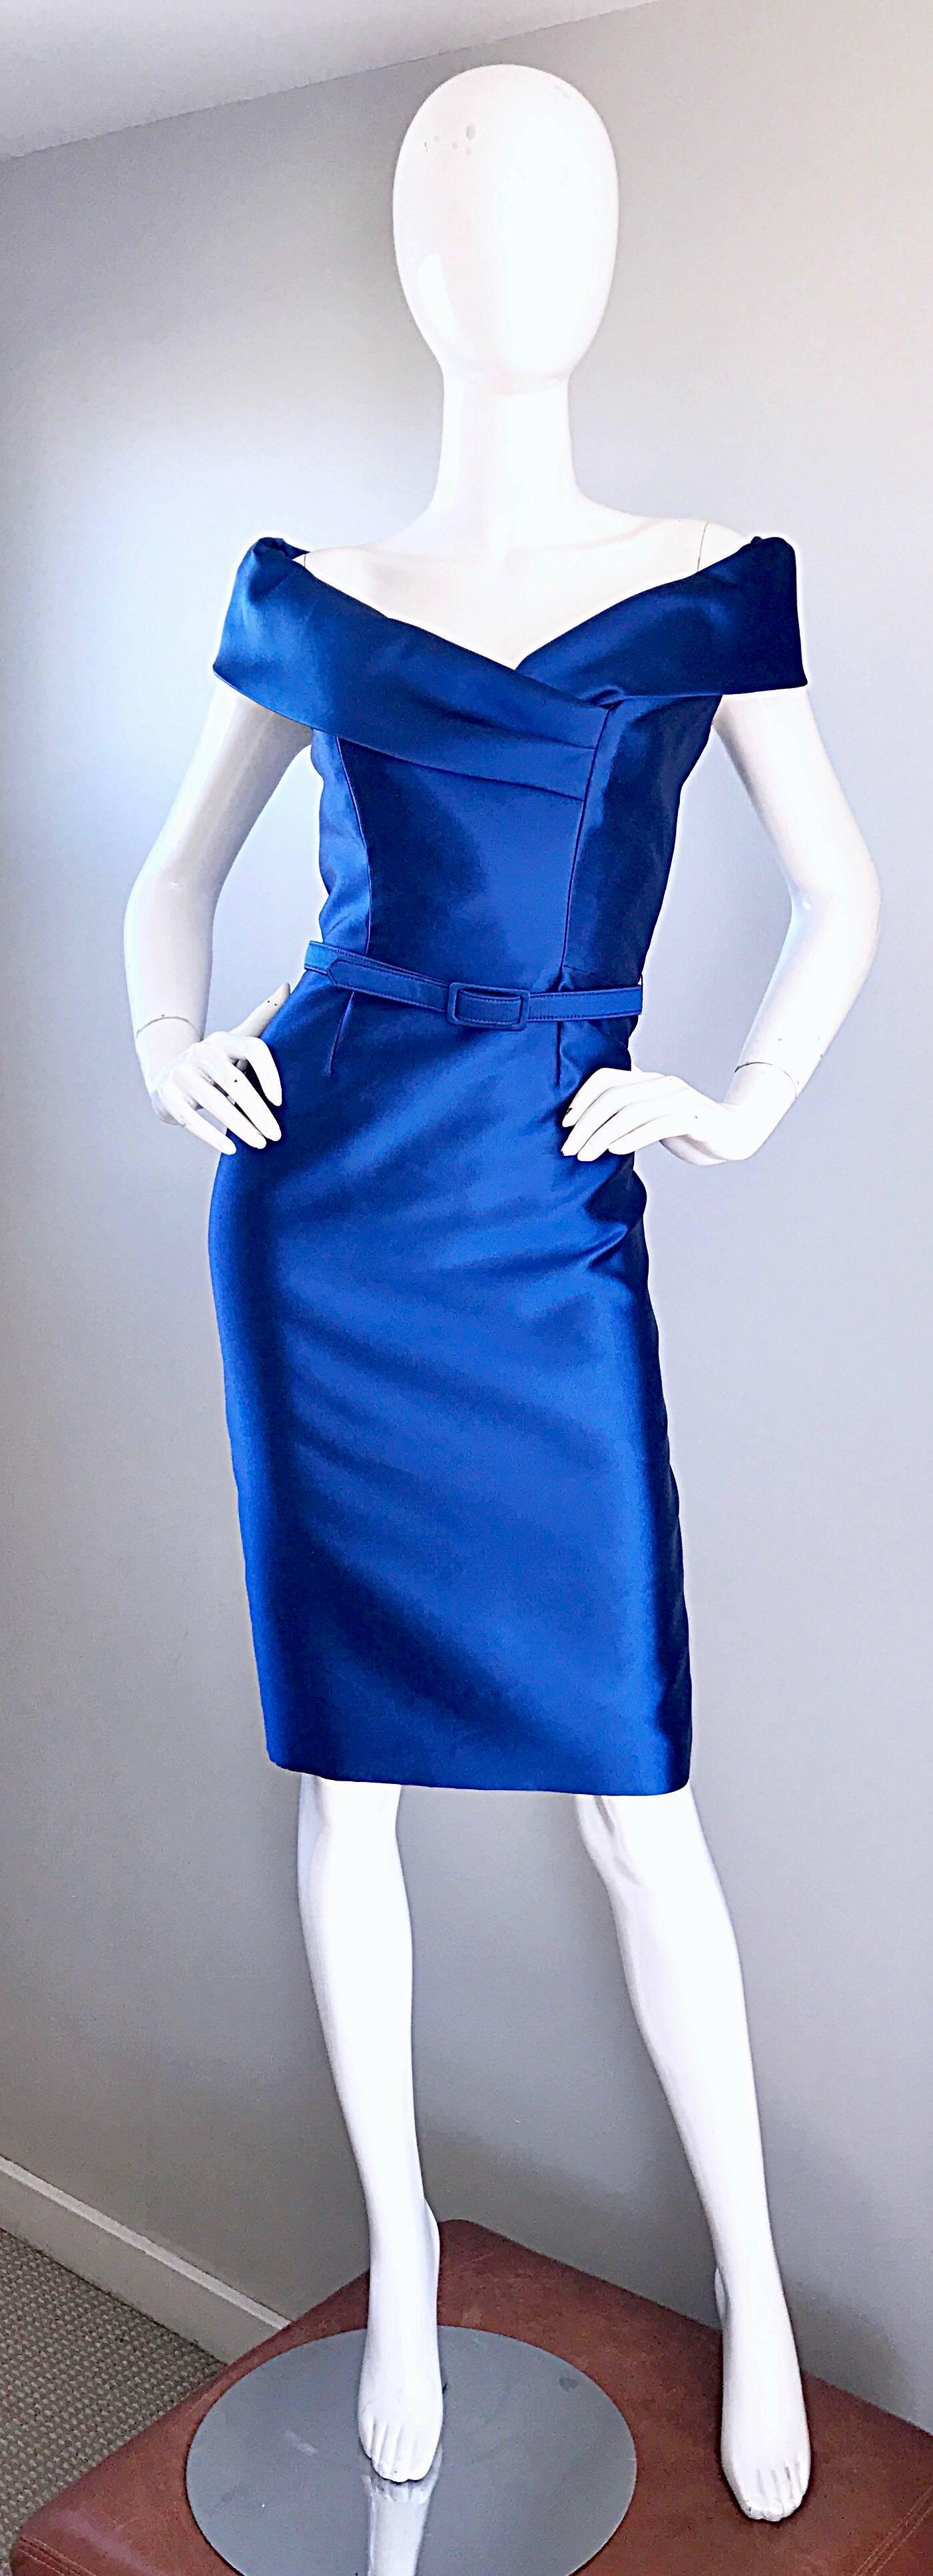 Sensational CATHERINE REGEHR $3,250 vibrant royal blue off-the-shoulder belted dress! Flattering body hugging fit looks amazing on! Features a matching detachable belt. Couture workmanship with so much attention to detail. Hidden zipper up the back